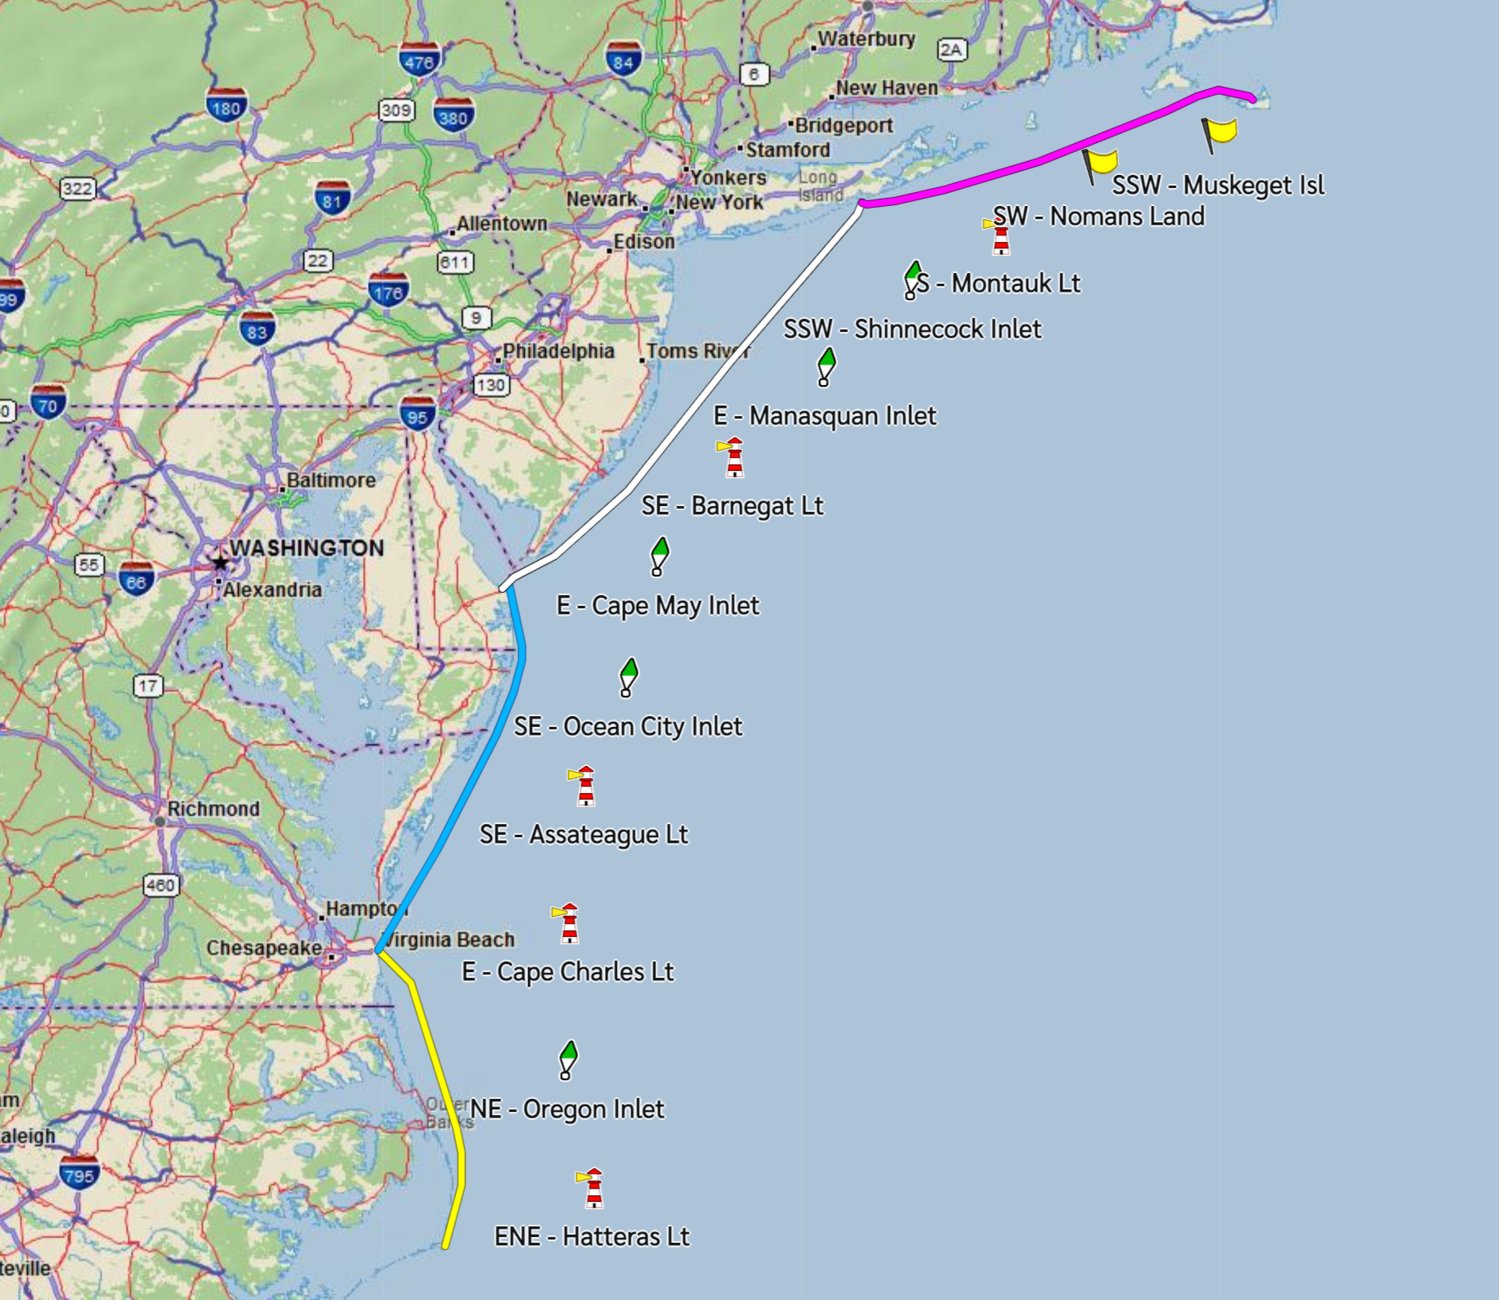 The four-phase route Adam Nagler plans to take. He is attempting to come to shore just three times to resupply.